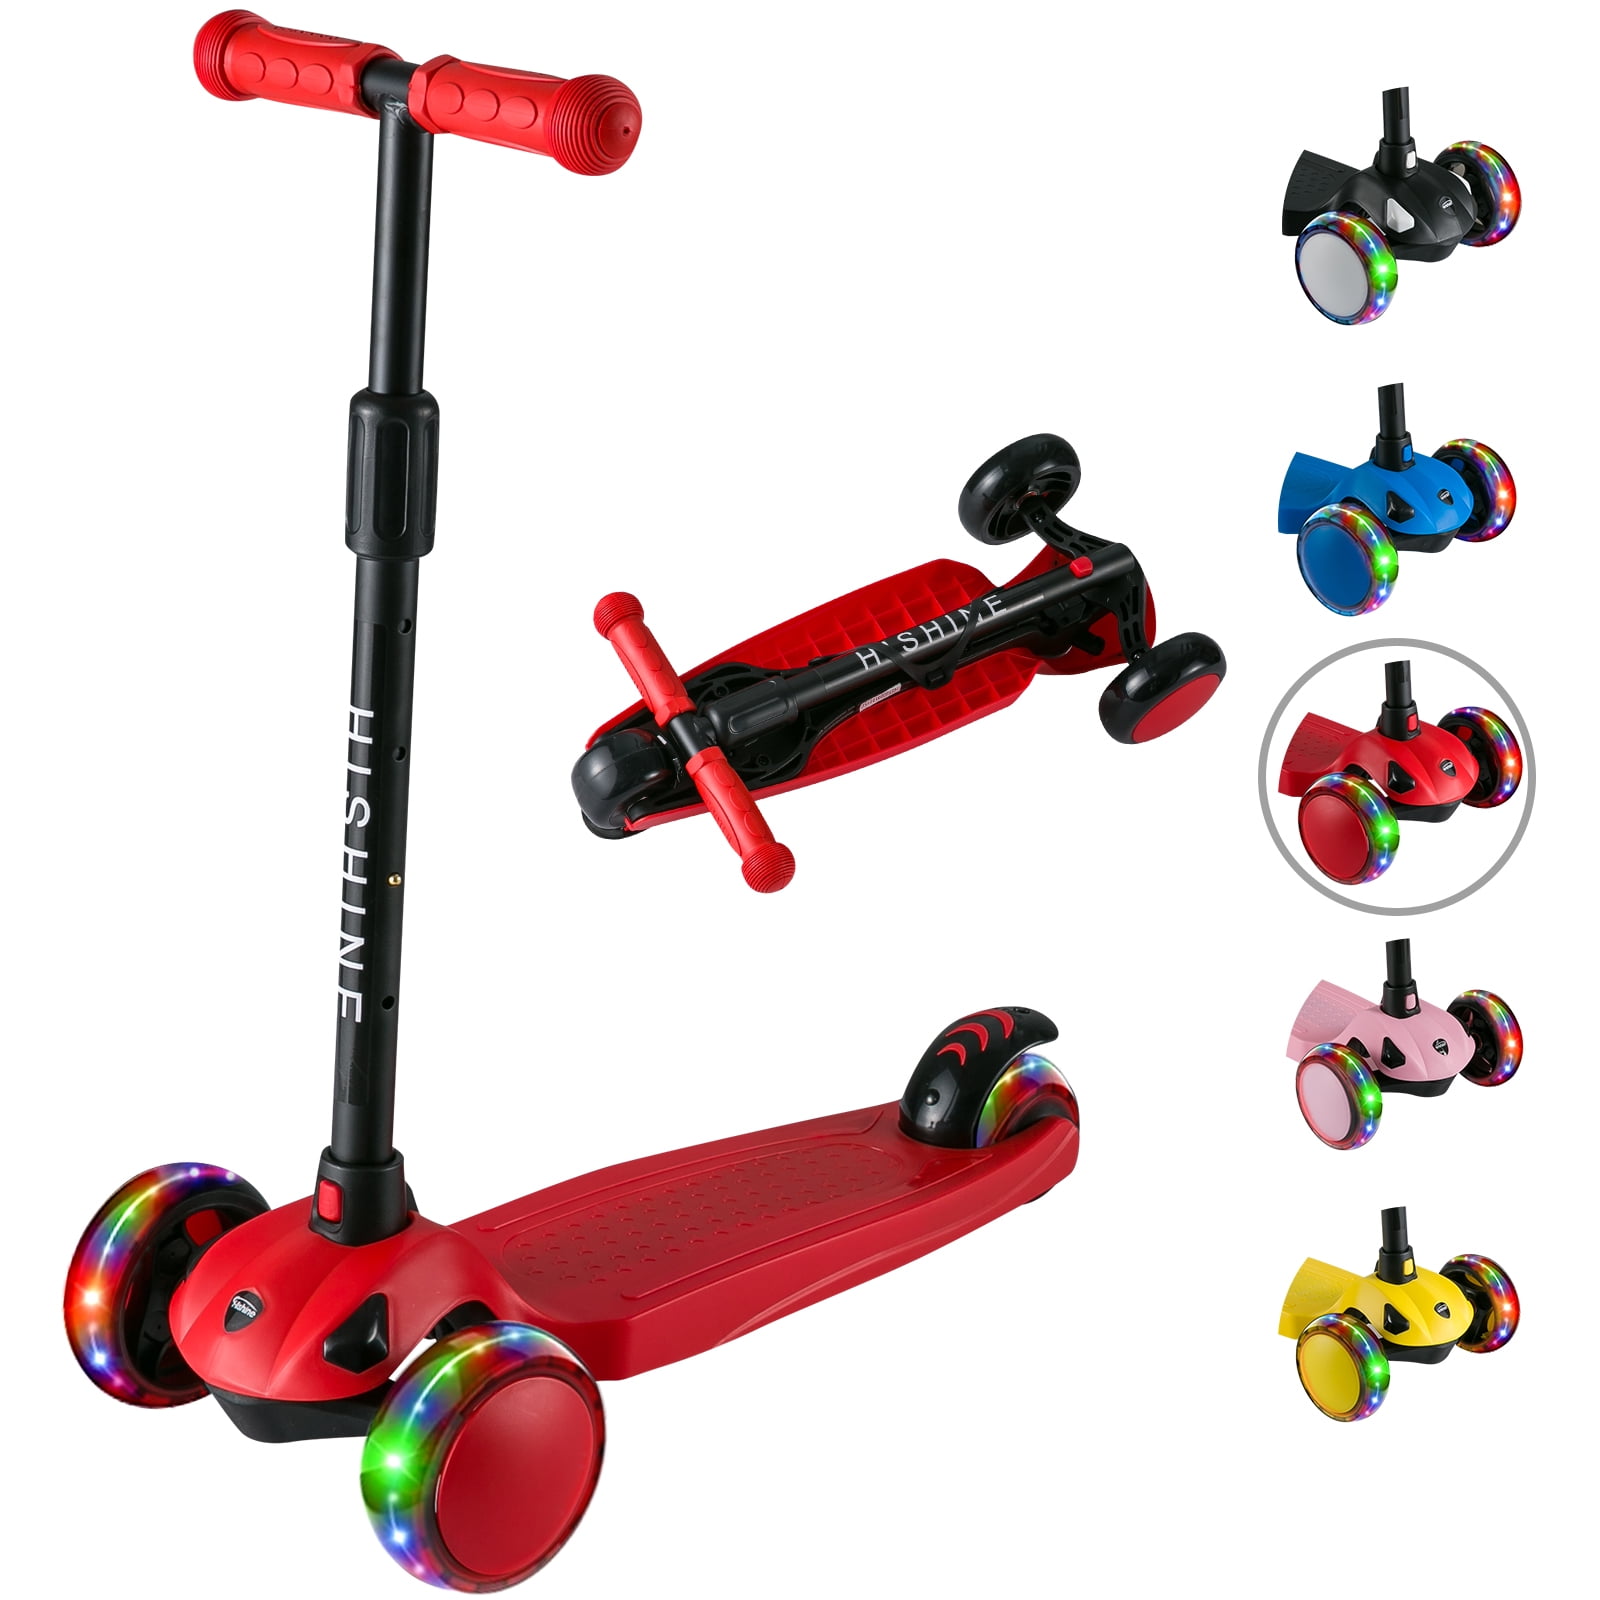 ROLLER tretroller ROSSO Childs SCOOTER RED bambole Tube dollhouse 1:12 tipo d1134 